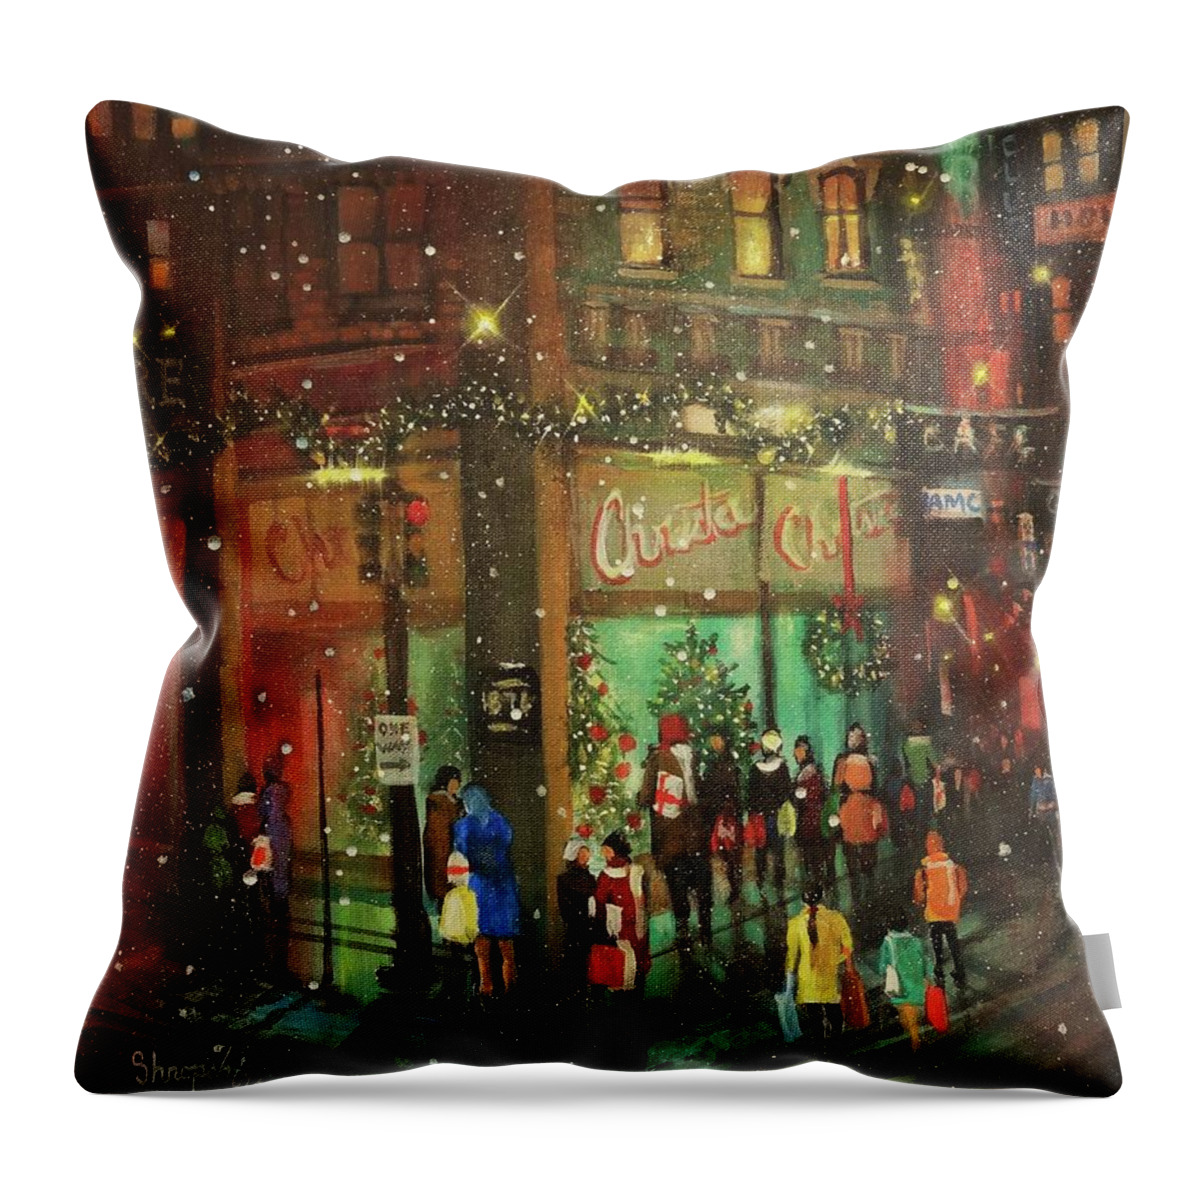 Old Chicago Throw Pillow featuring the painting Christmas Shopping by Tom Shropshire